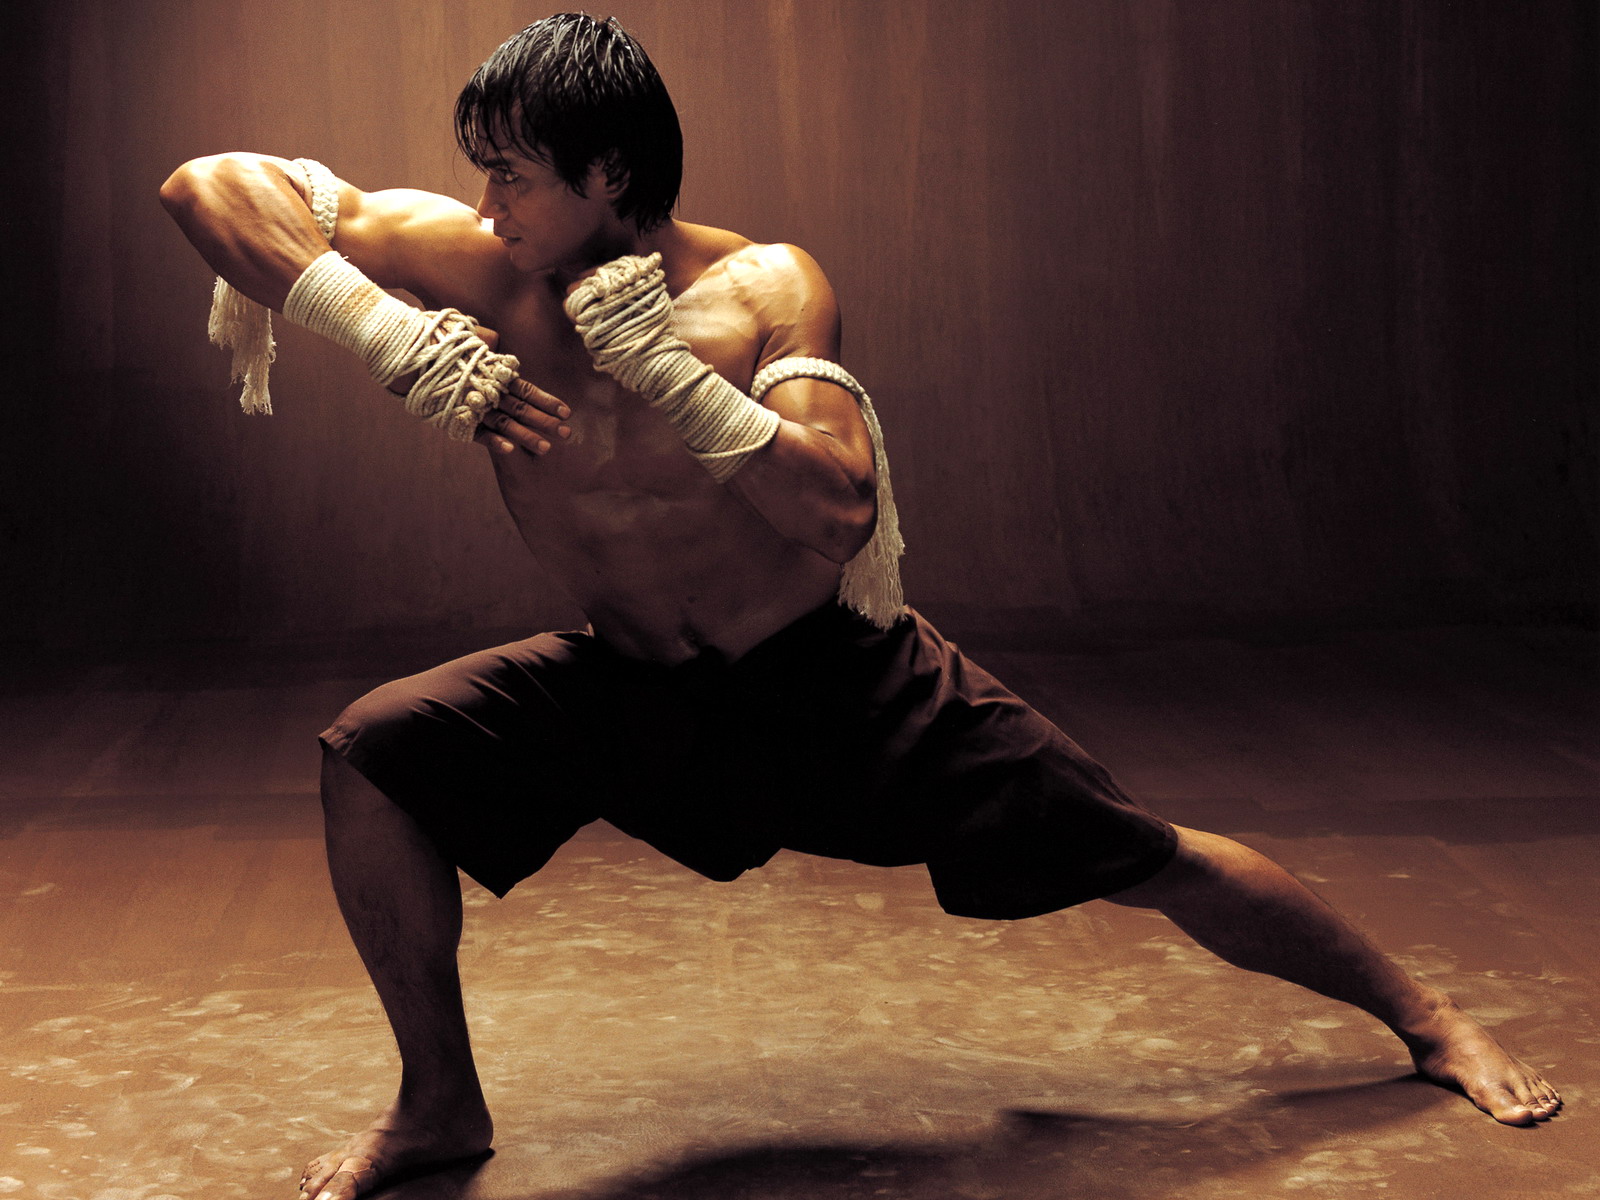 Ong Bak Wallpaper And Image Pictures Photos